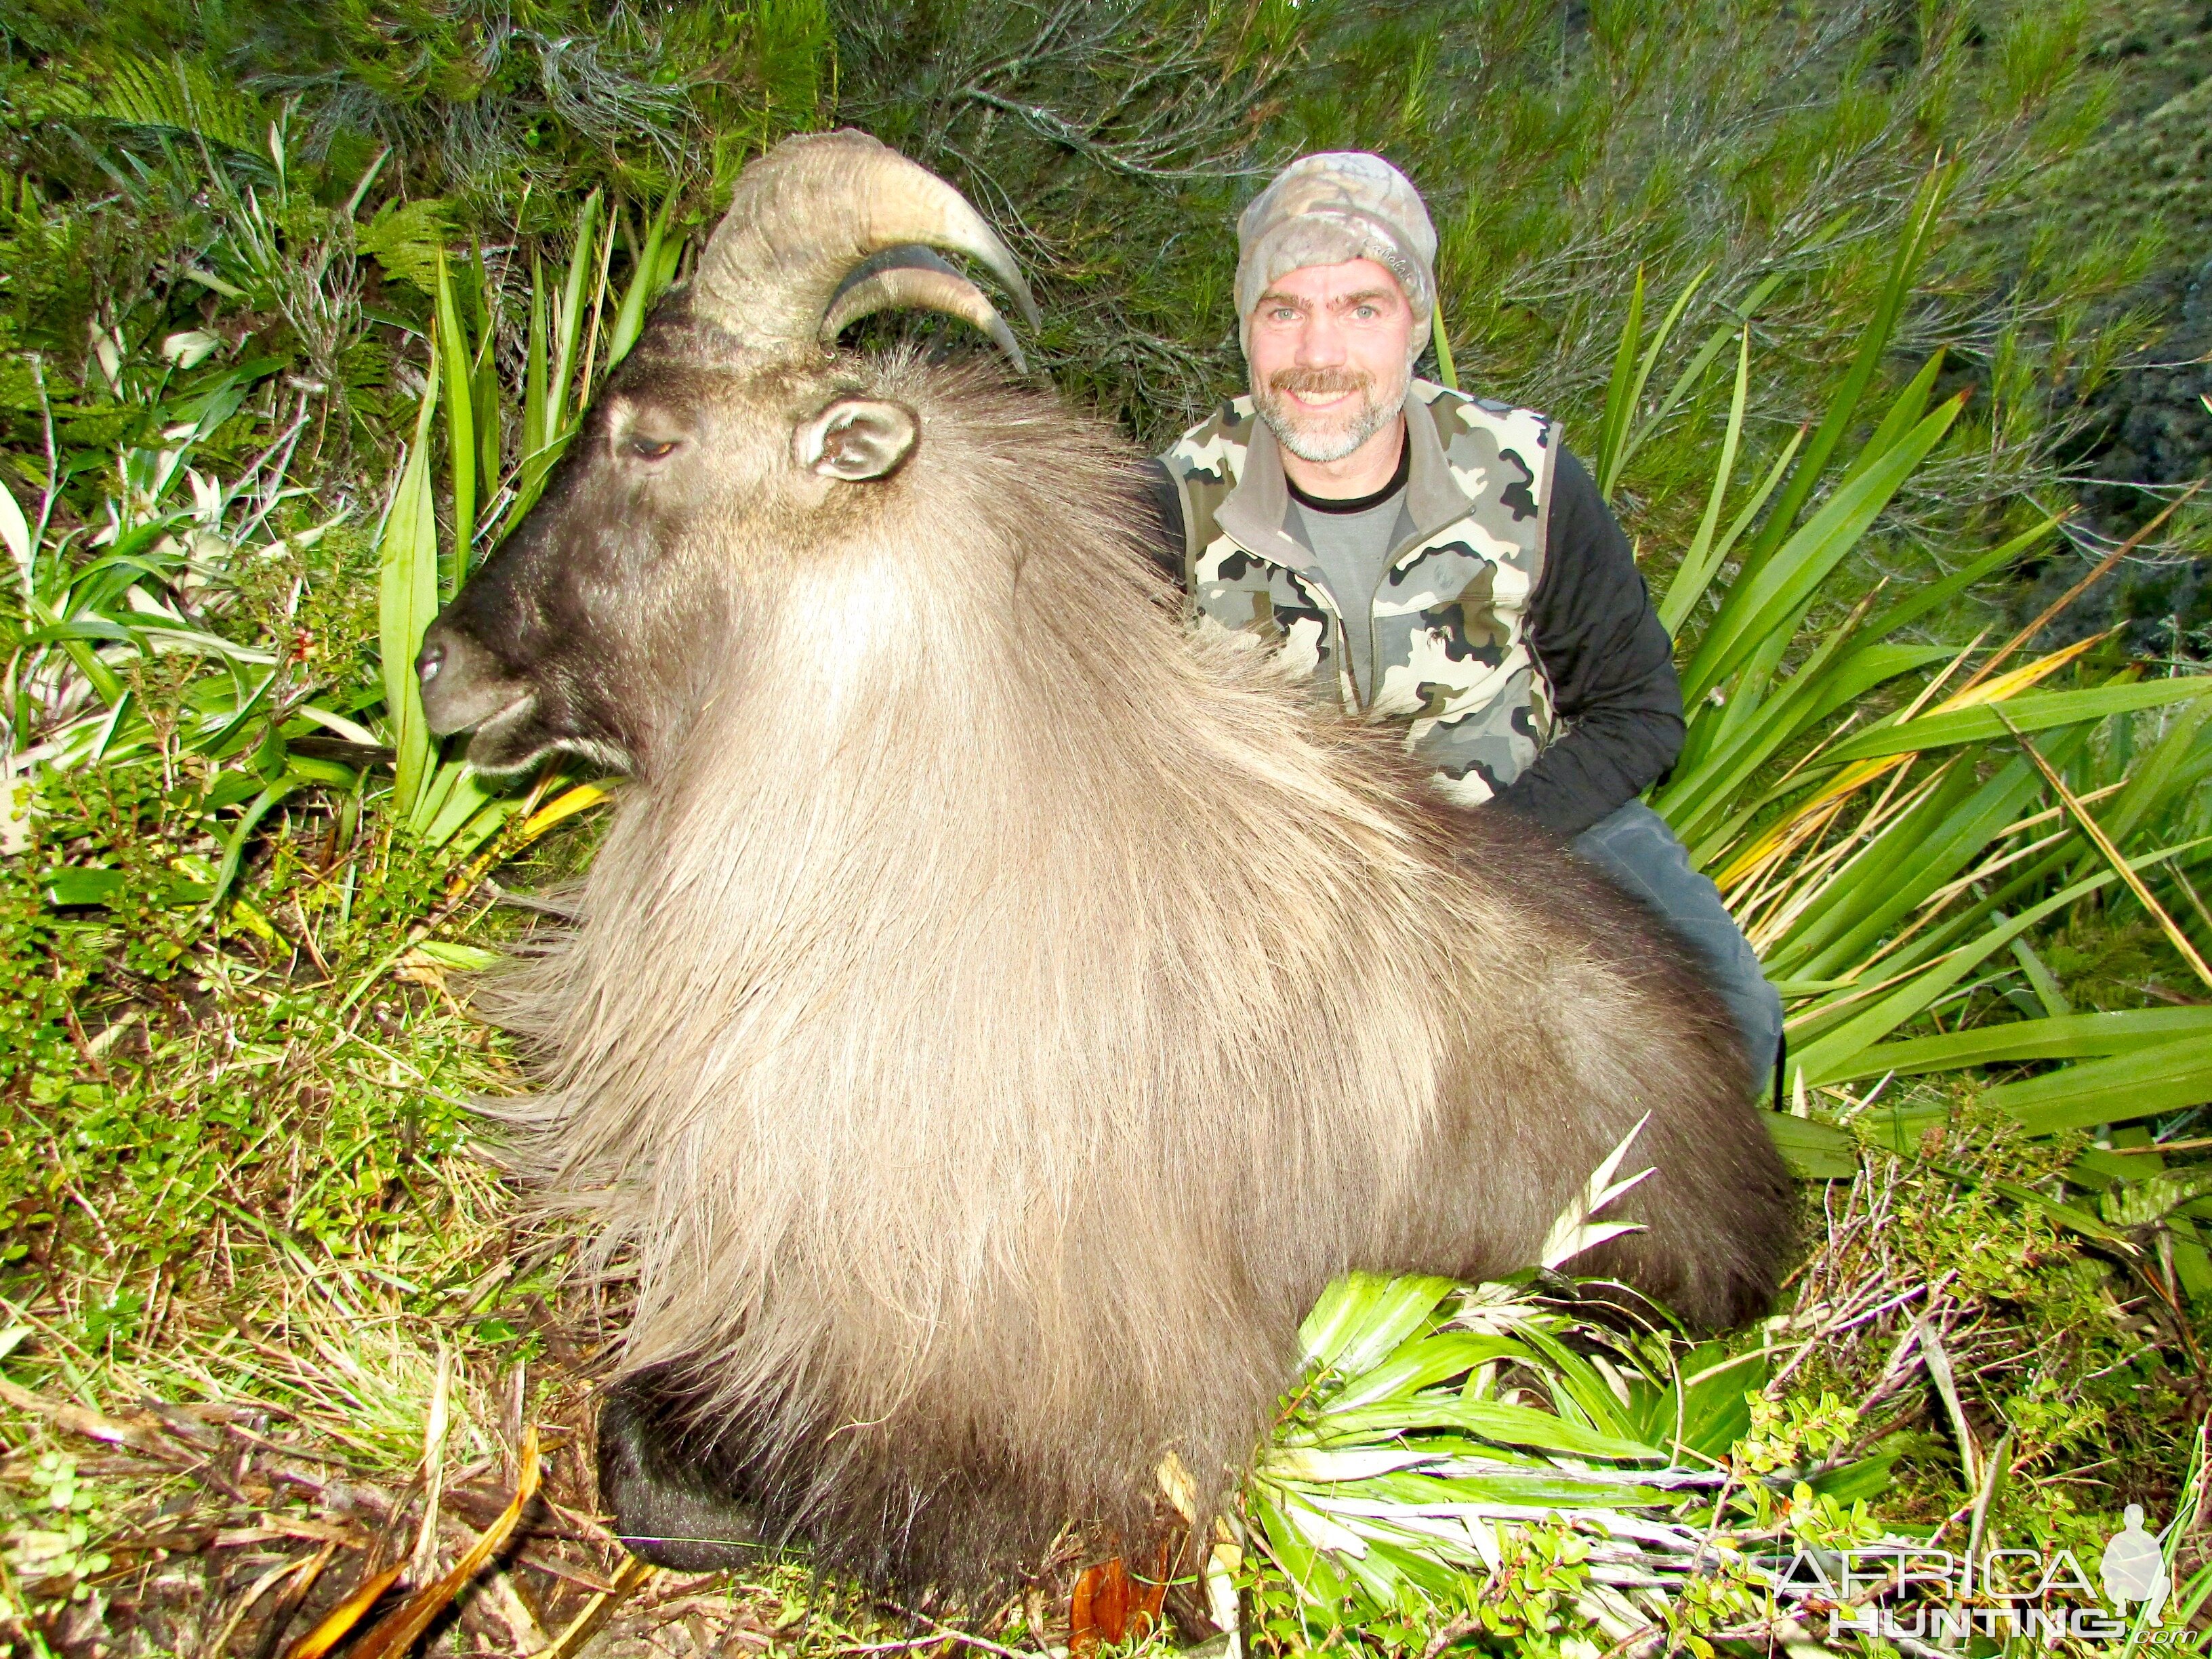 Tahr Hunting on private land- Free ranging & wild foot hunt